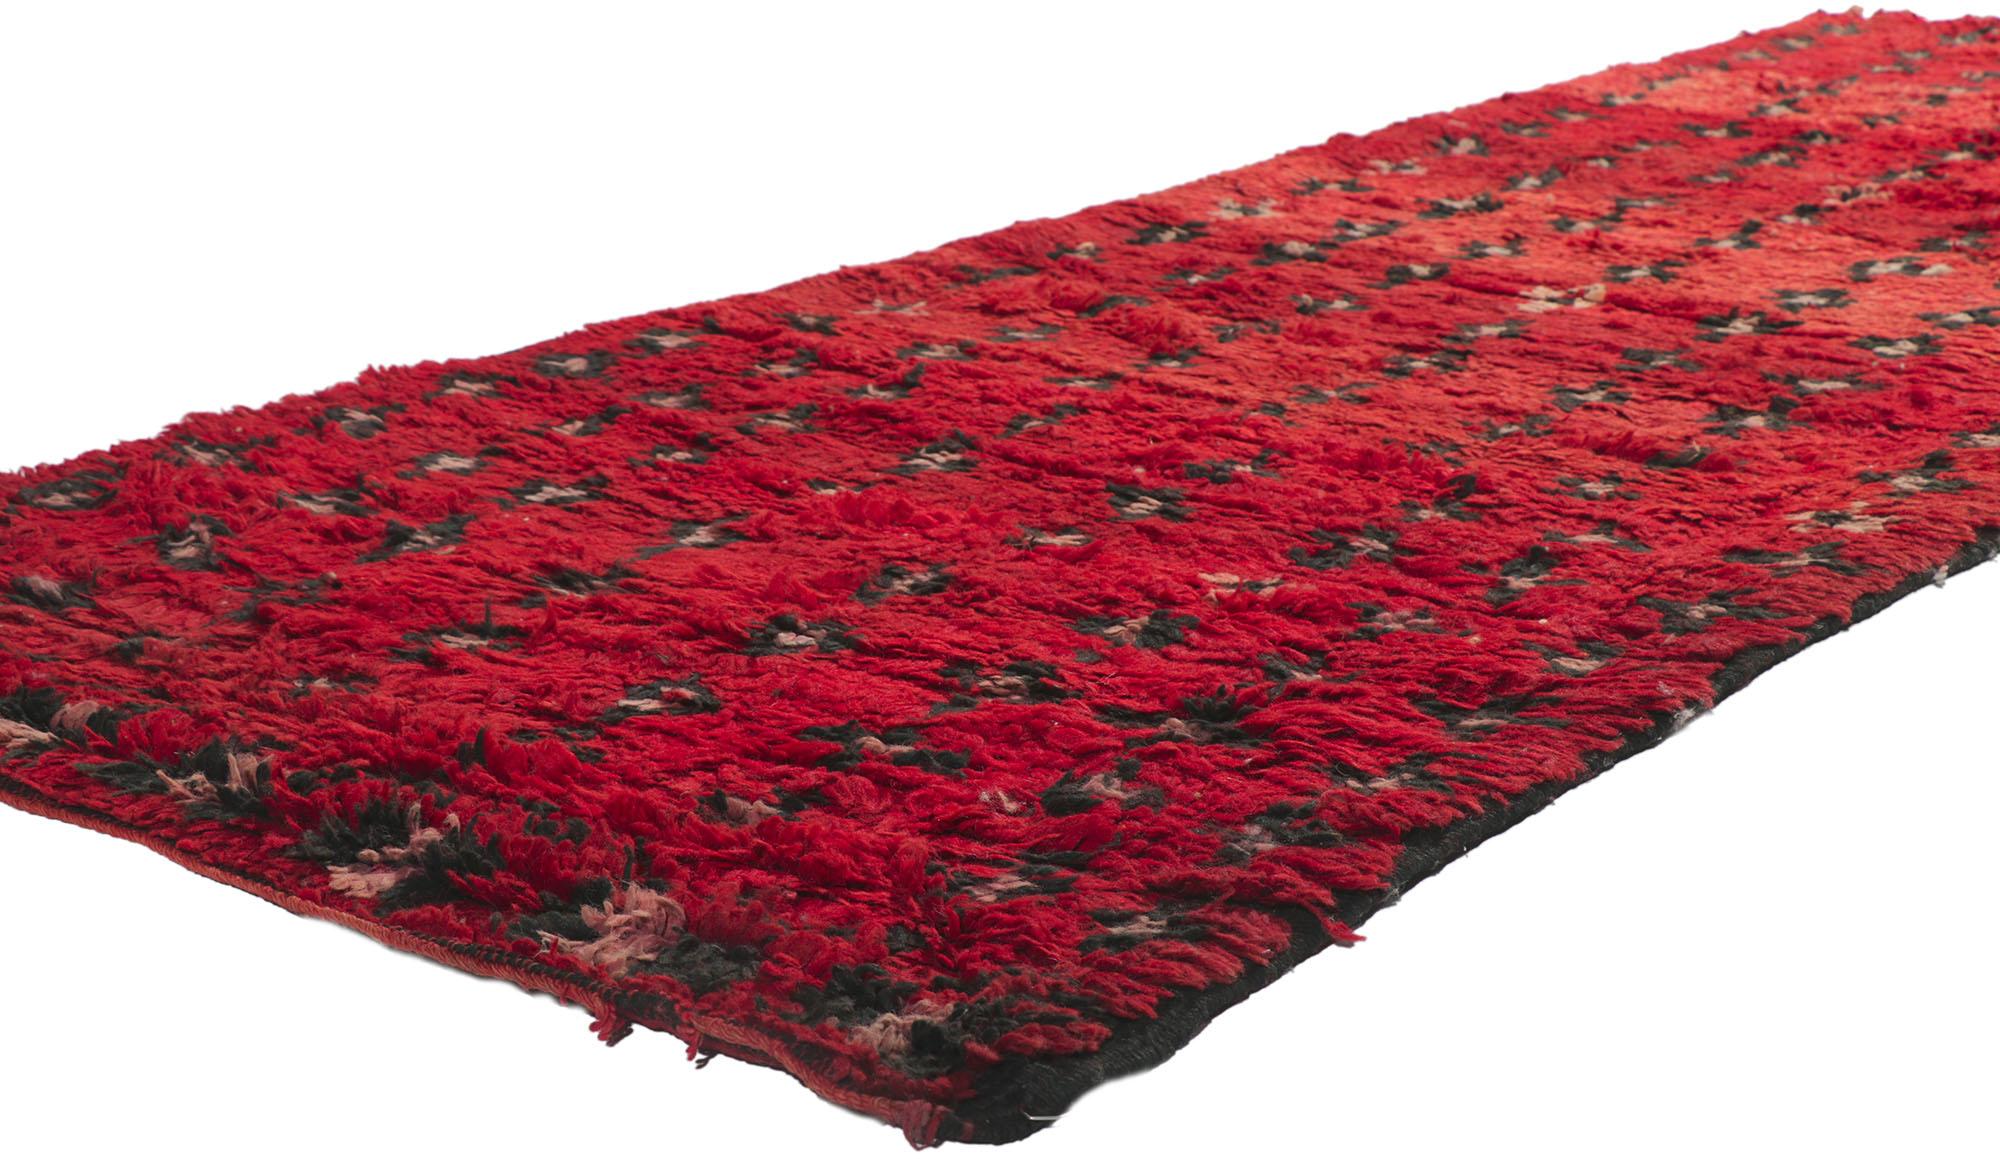 ?21508 vintage Berber red Moroccan Hallway Runner 03'06 x 08'08. ?Showcasing an expressive tribal design, incredible detail and texture, this hand knotted wool vintage Berber Moroccan runner is a captivating vision of woven beauty. The eye-catching